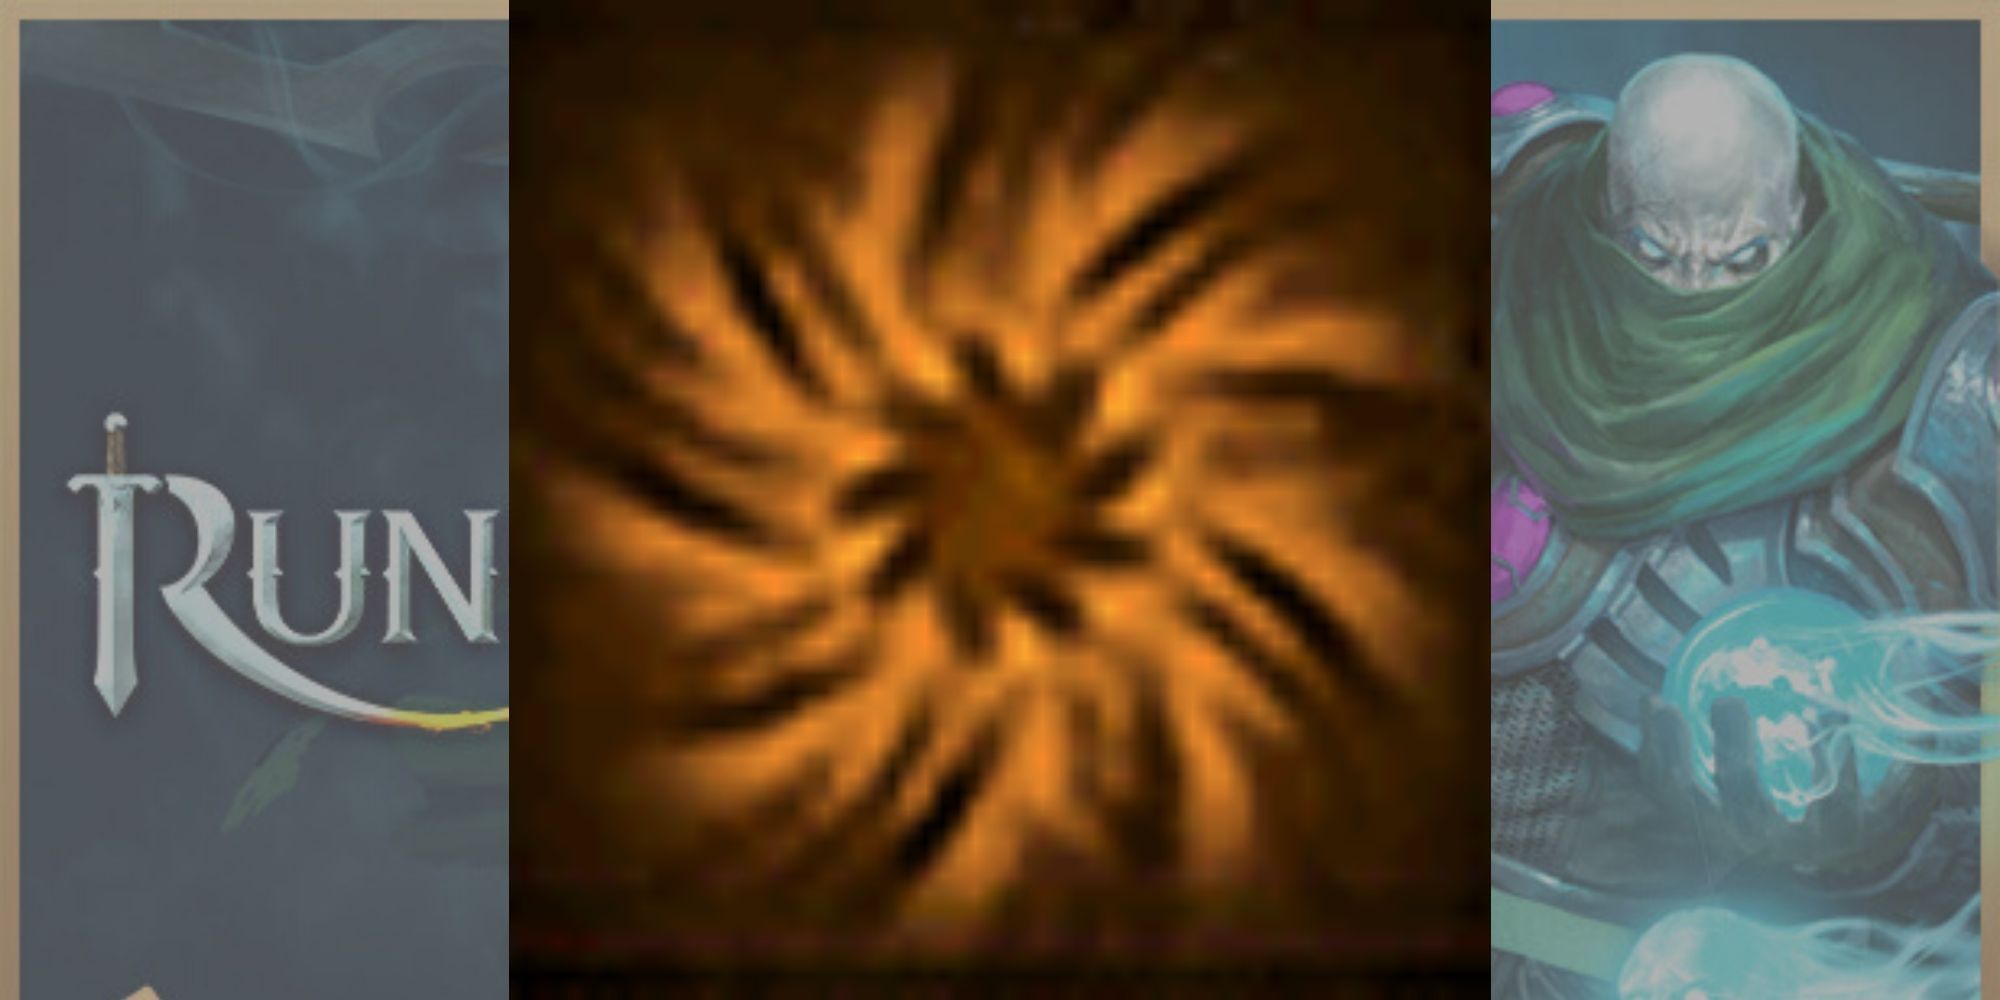 The Berserk melee ability icon superimposed over an official RuneScape 3 promo image.